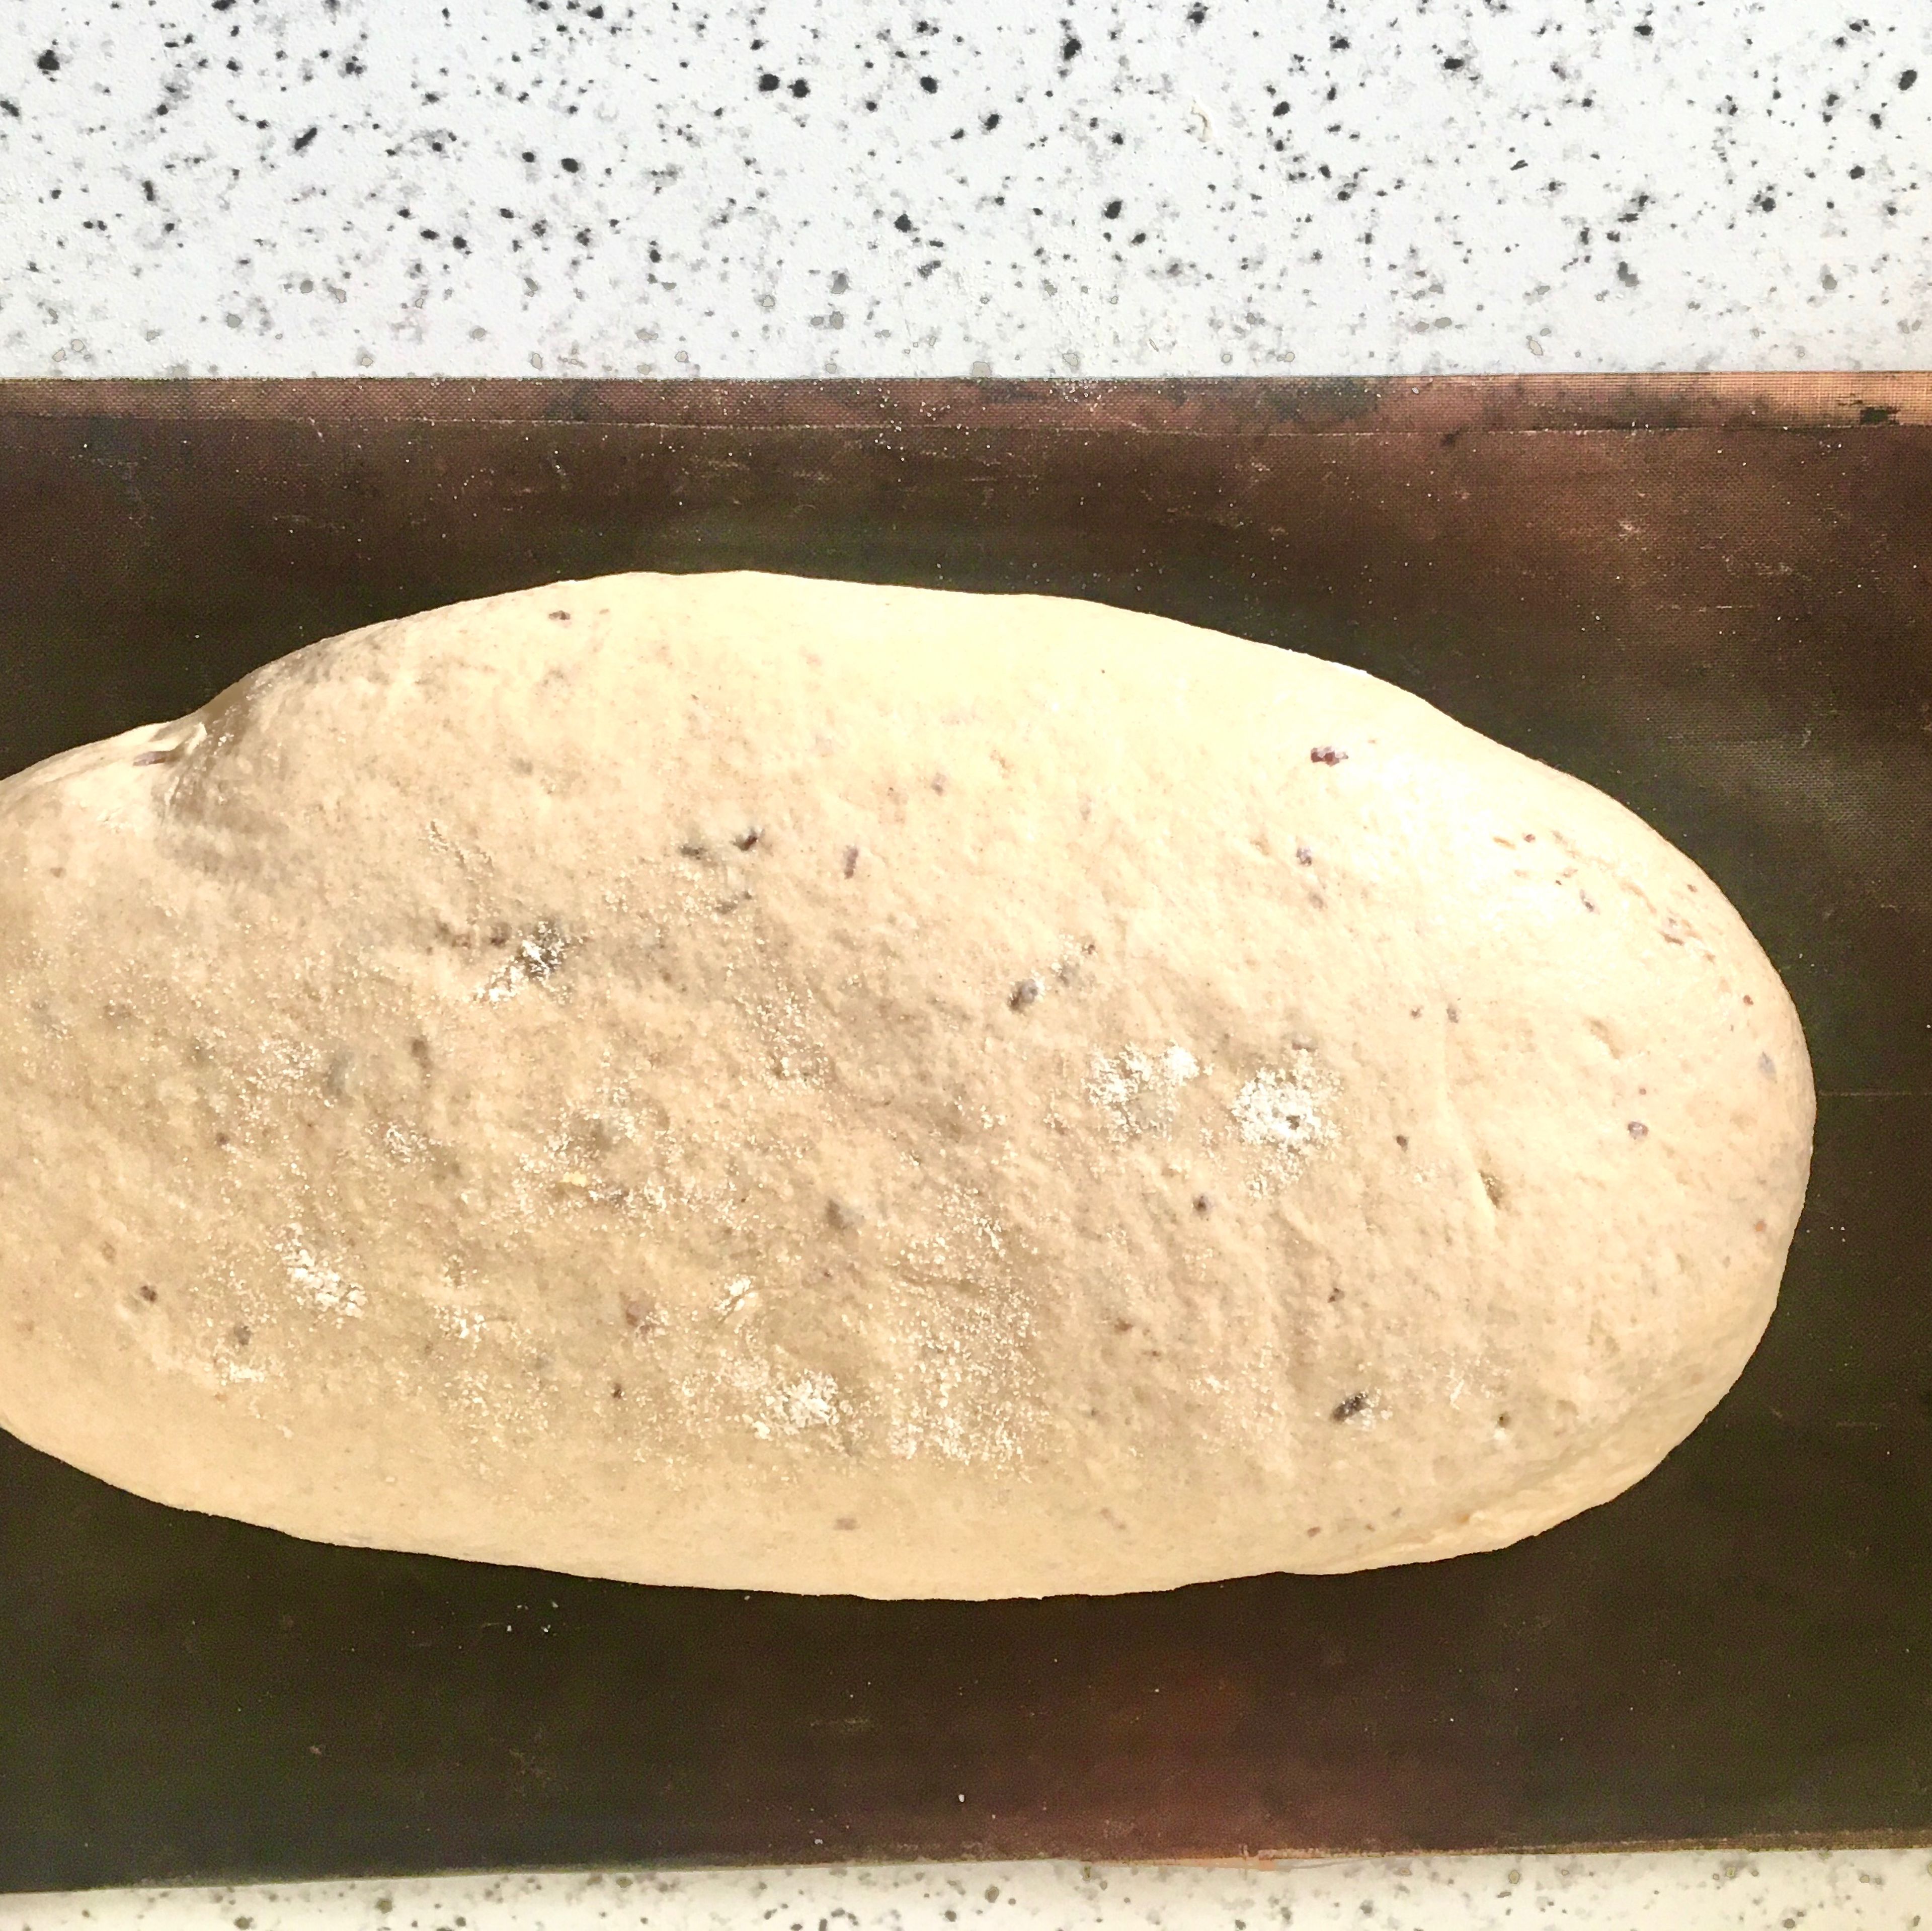 Deflate the risen dough and fold it 4-5 times. Shape into a loaf and place over a baking paper to ease the transferring. Cover with damp towel. Heat the oven to 250 C and place a suitable baking dish inside to preheat. As the oven heated through, lightly dust the dough surface with some flour.